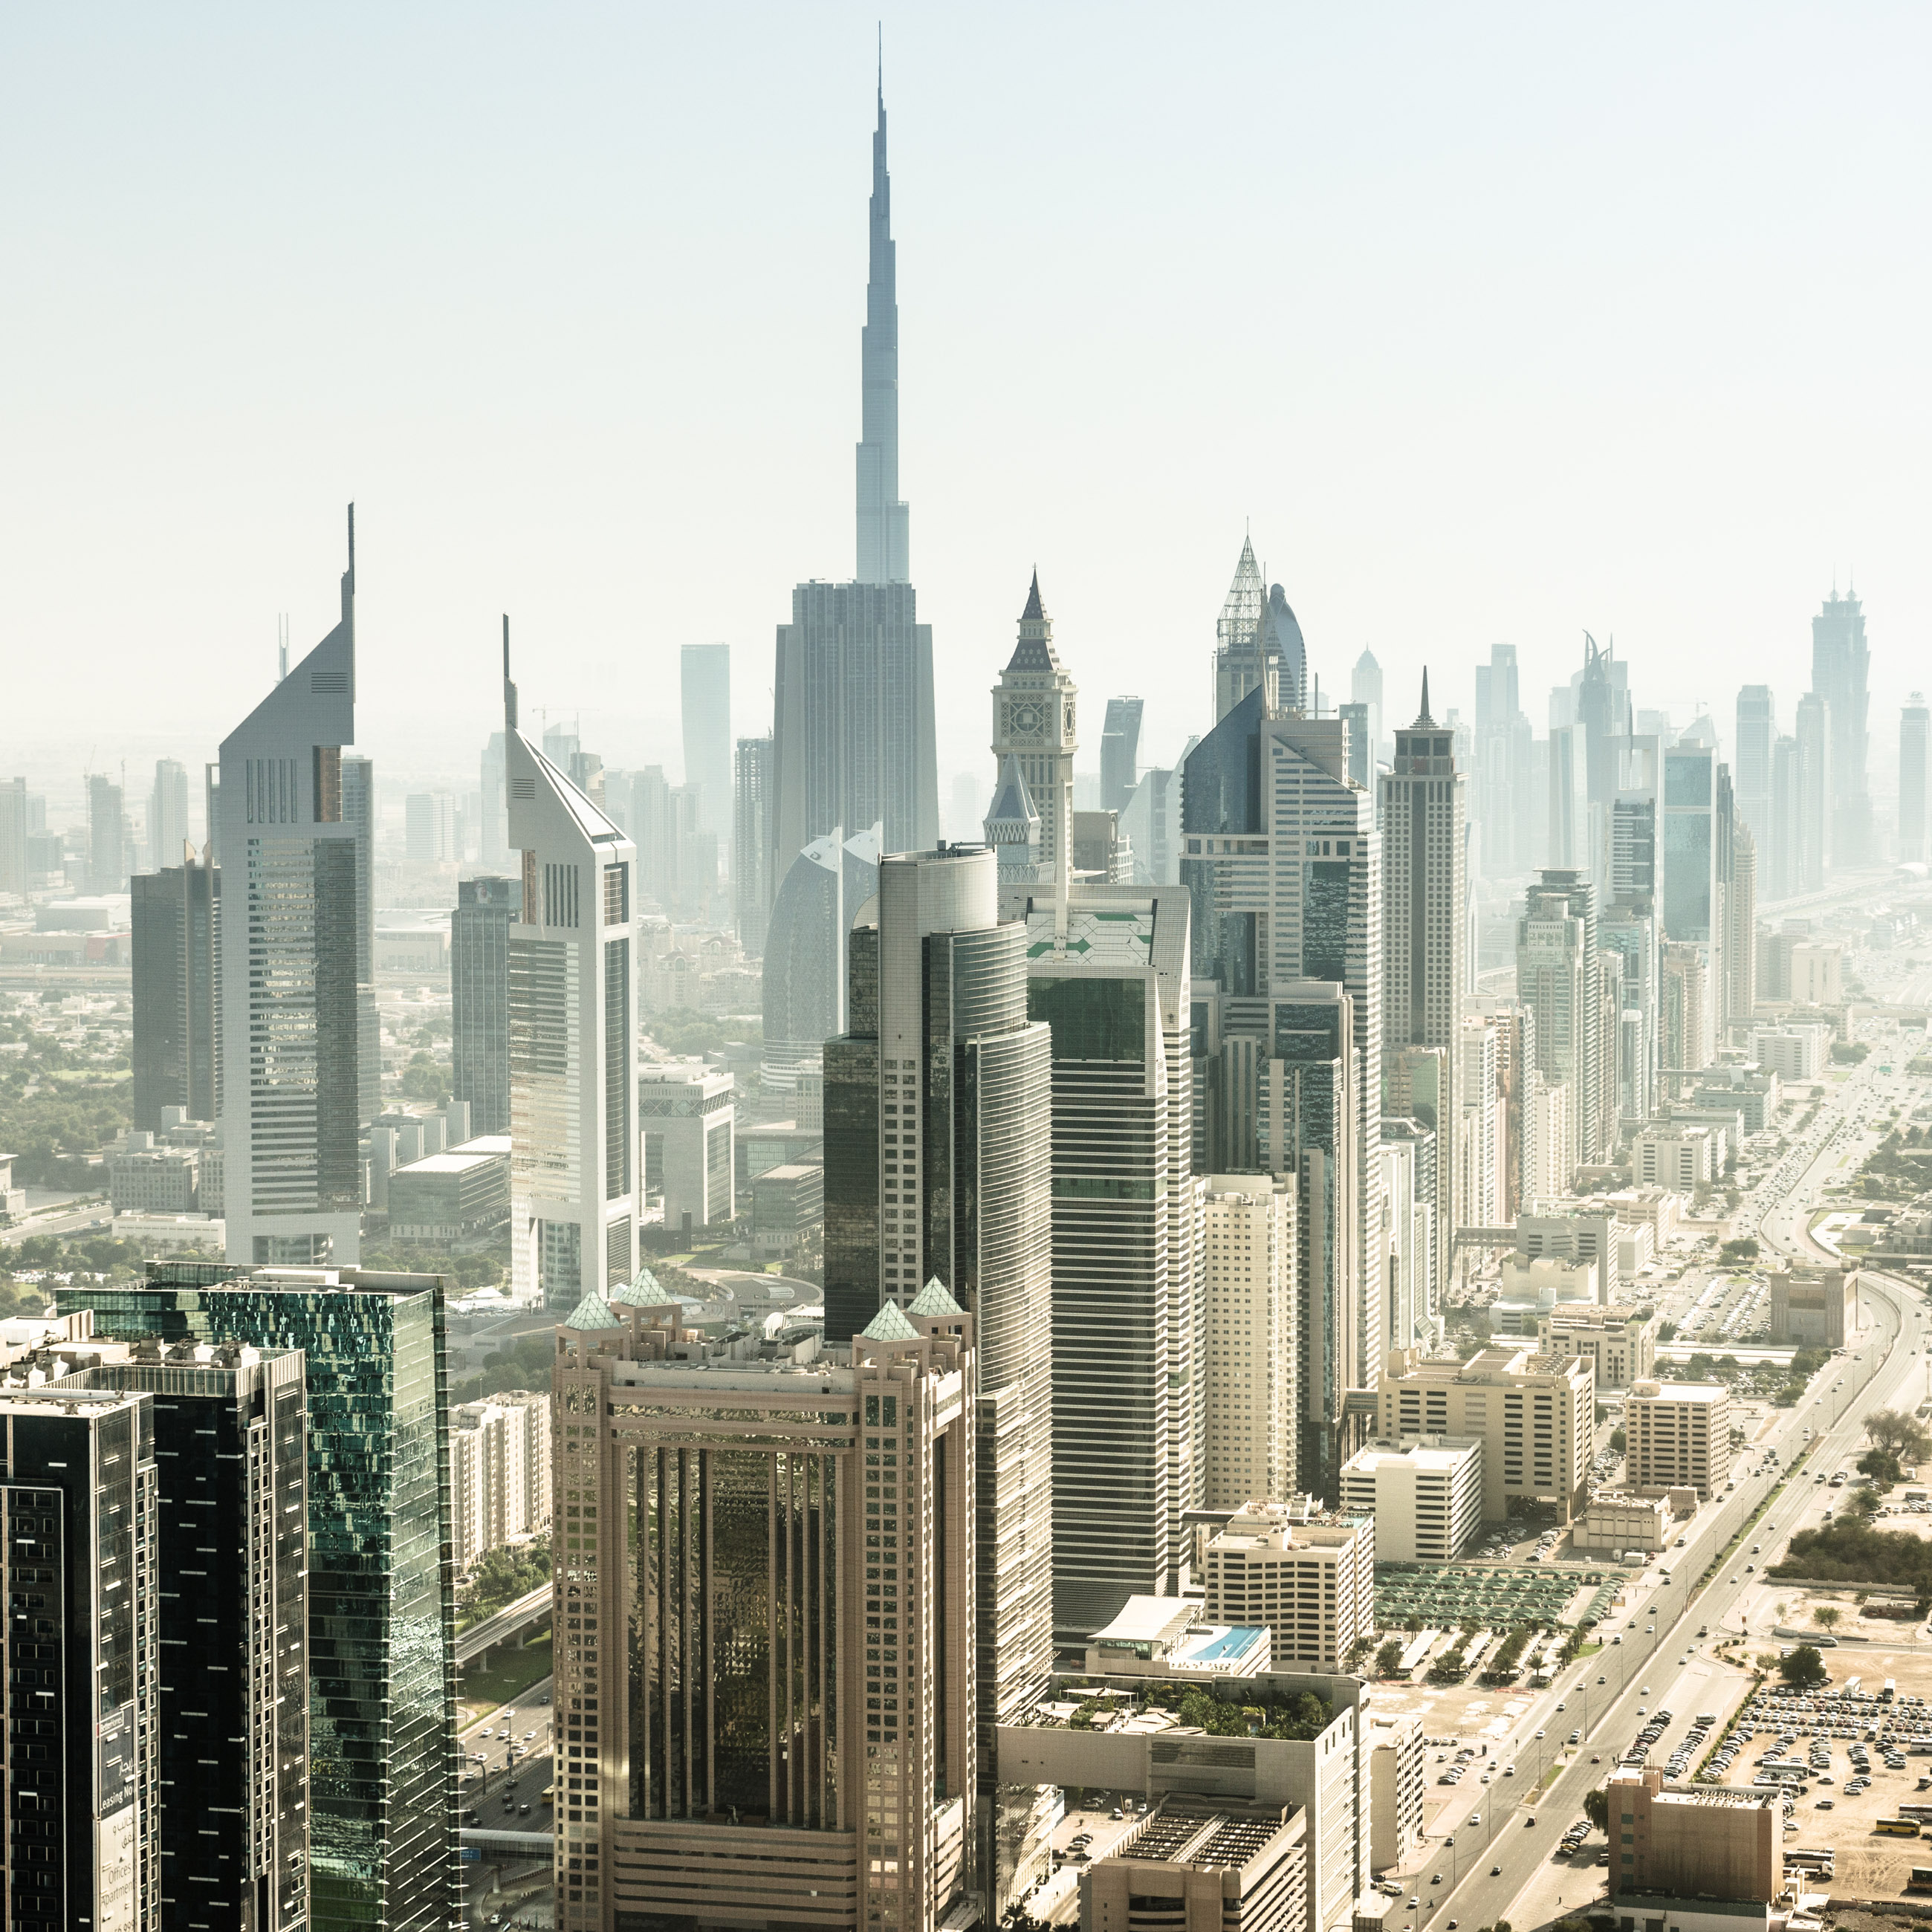 More Than 300 Retailers to Process 400,000-500,000 Daily Payments with SAP at Expo 2020 Dubai